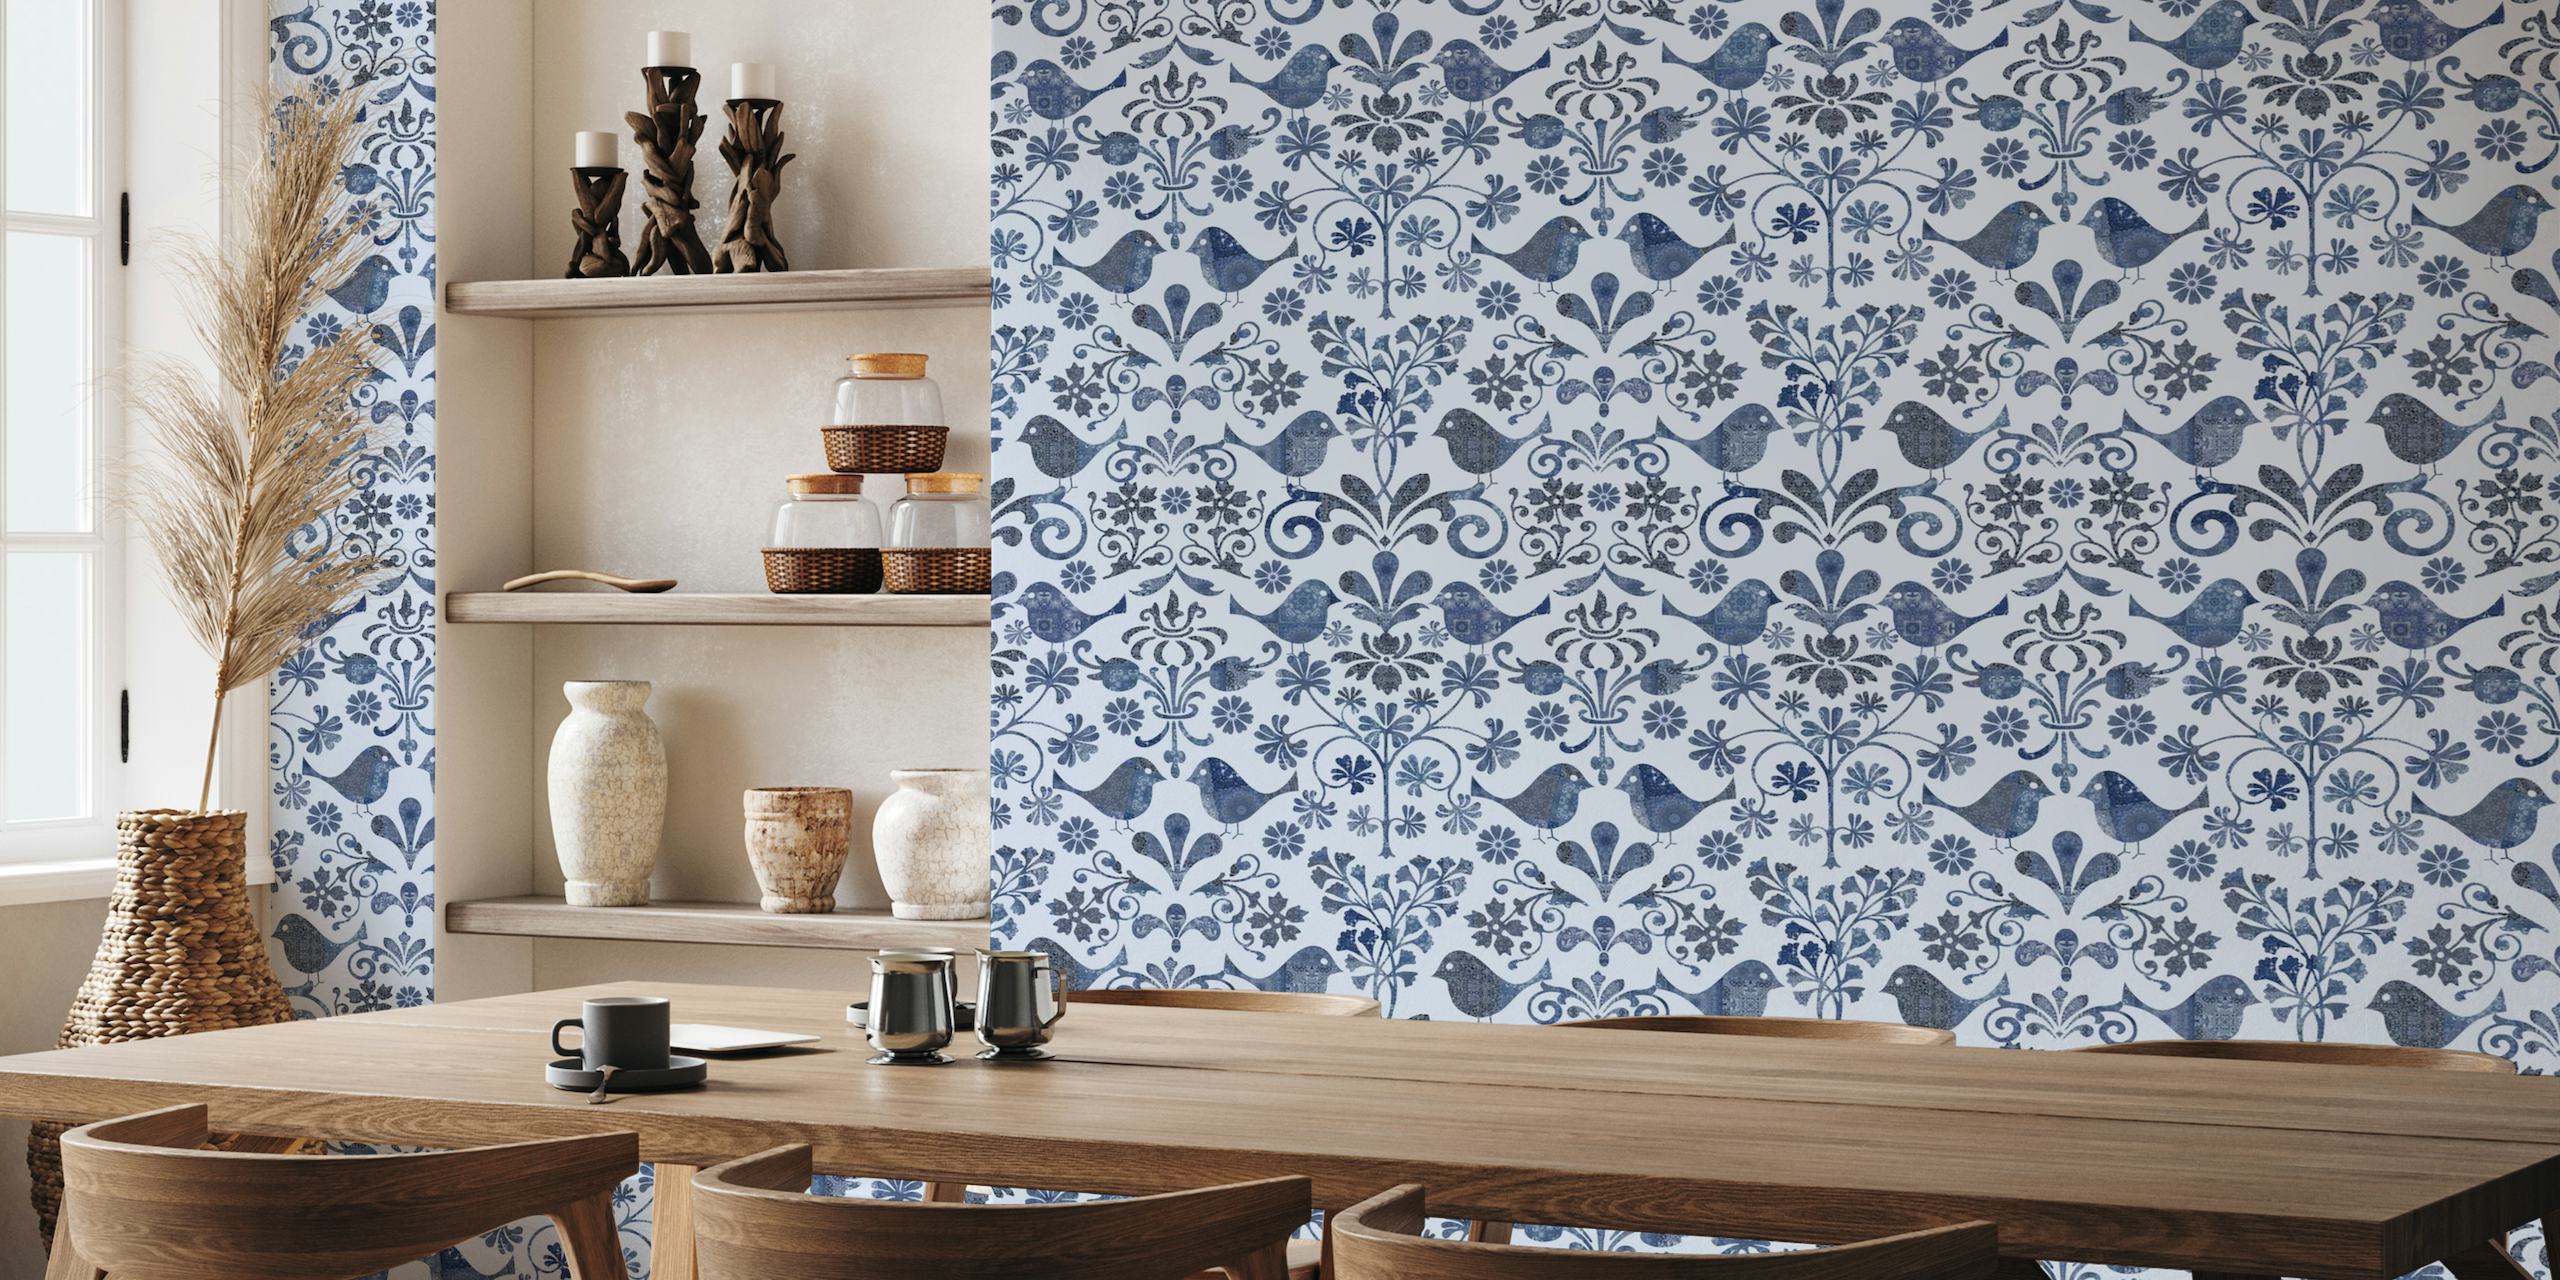 Scandinavian-style wall mural with birds and floral patterns in blue hues